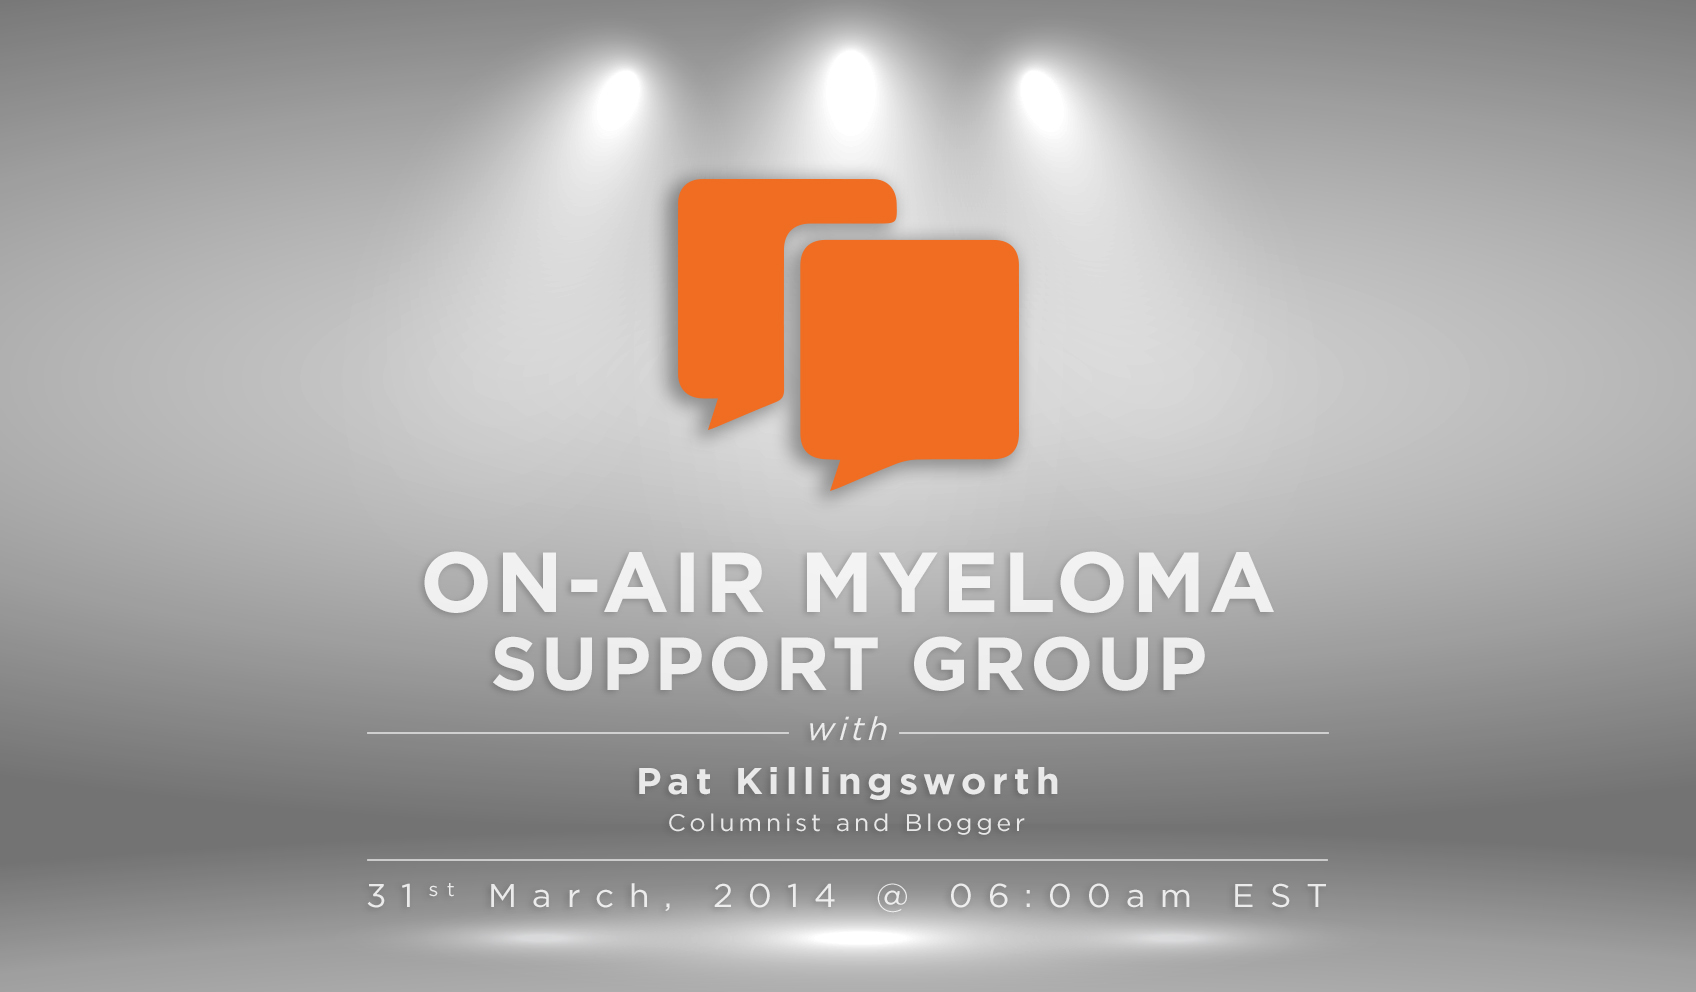 On-Air Myeloma Support Group with Pat Killingsworth